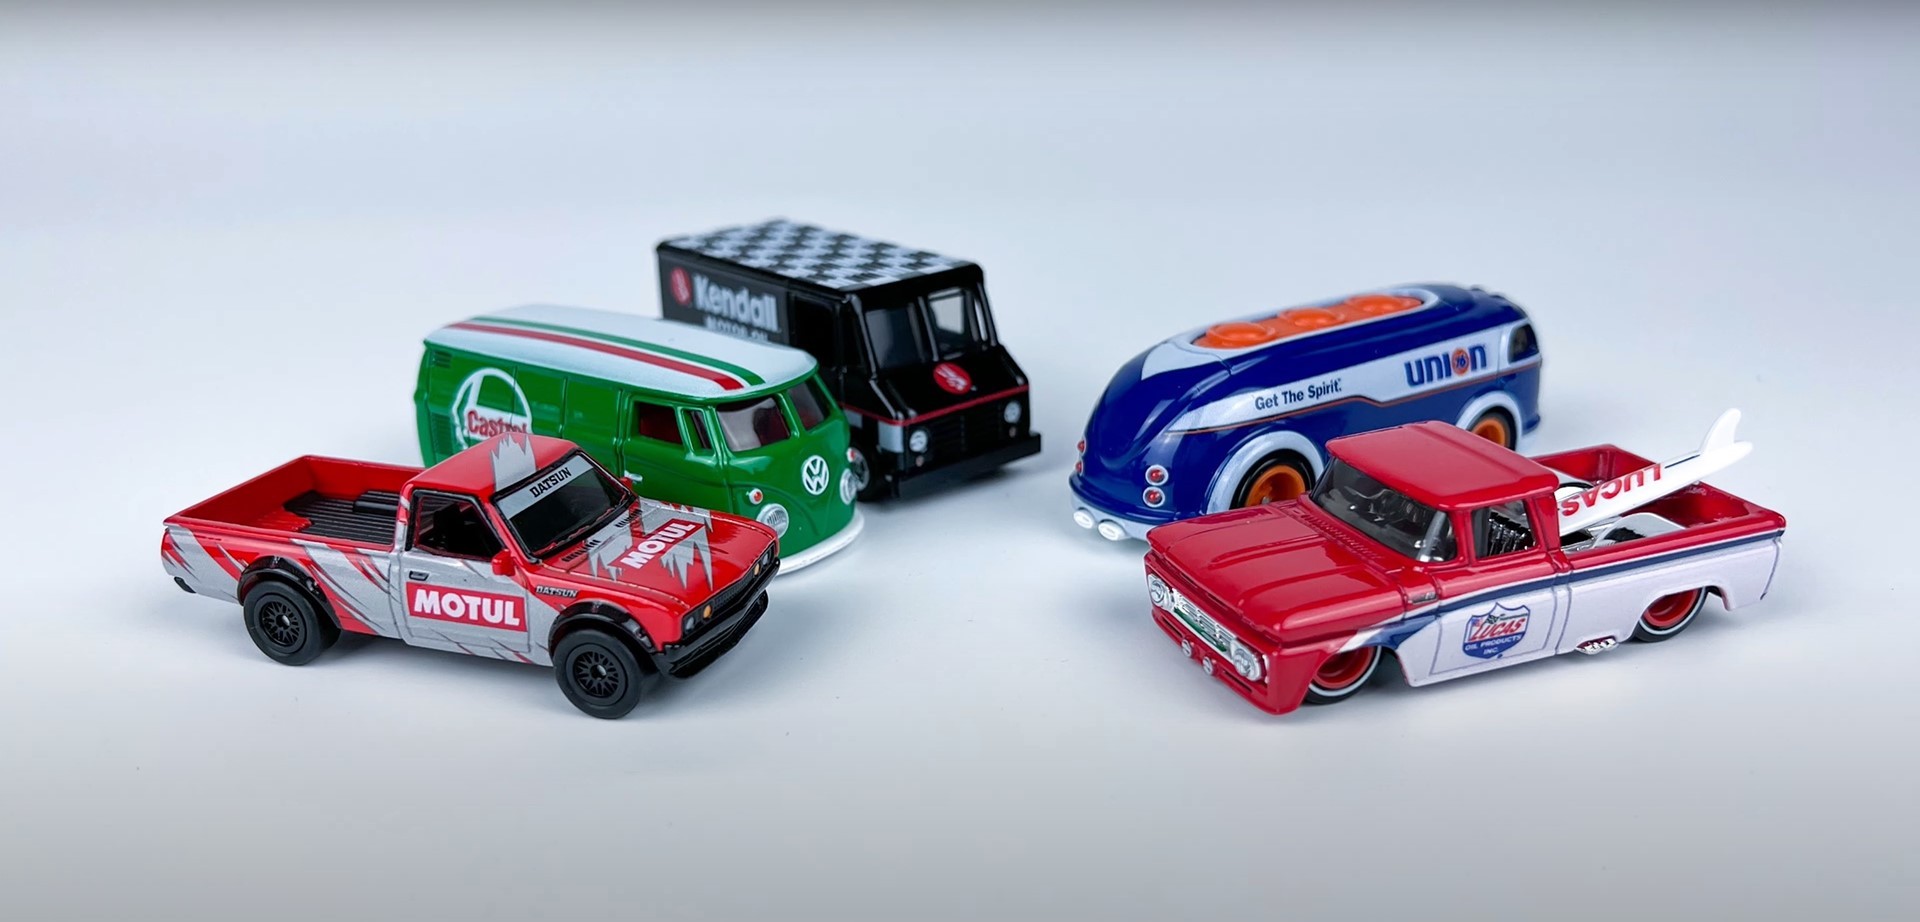 2023 Hot Wheels Vintage Oil Collection Is a Great Mix of Five